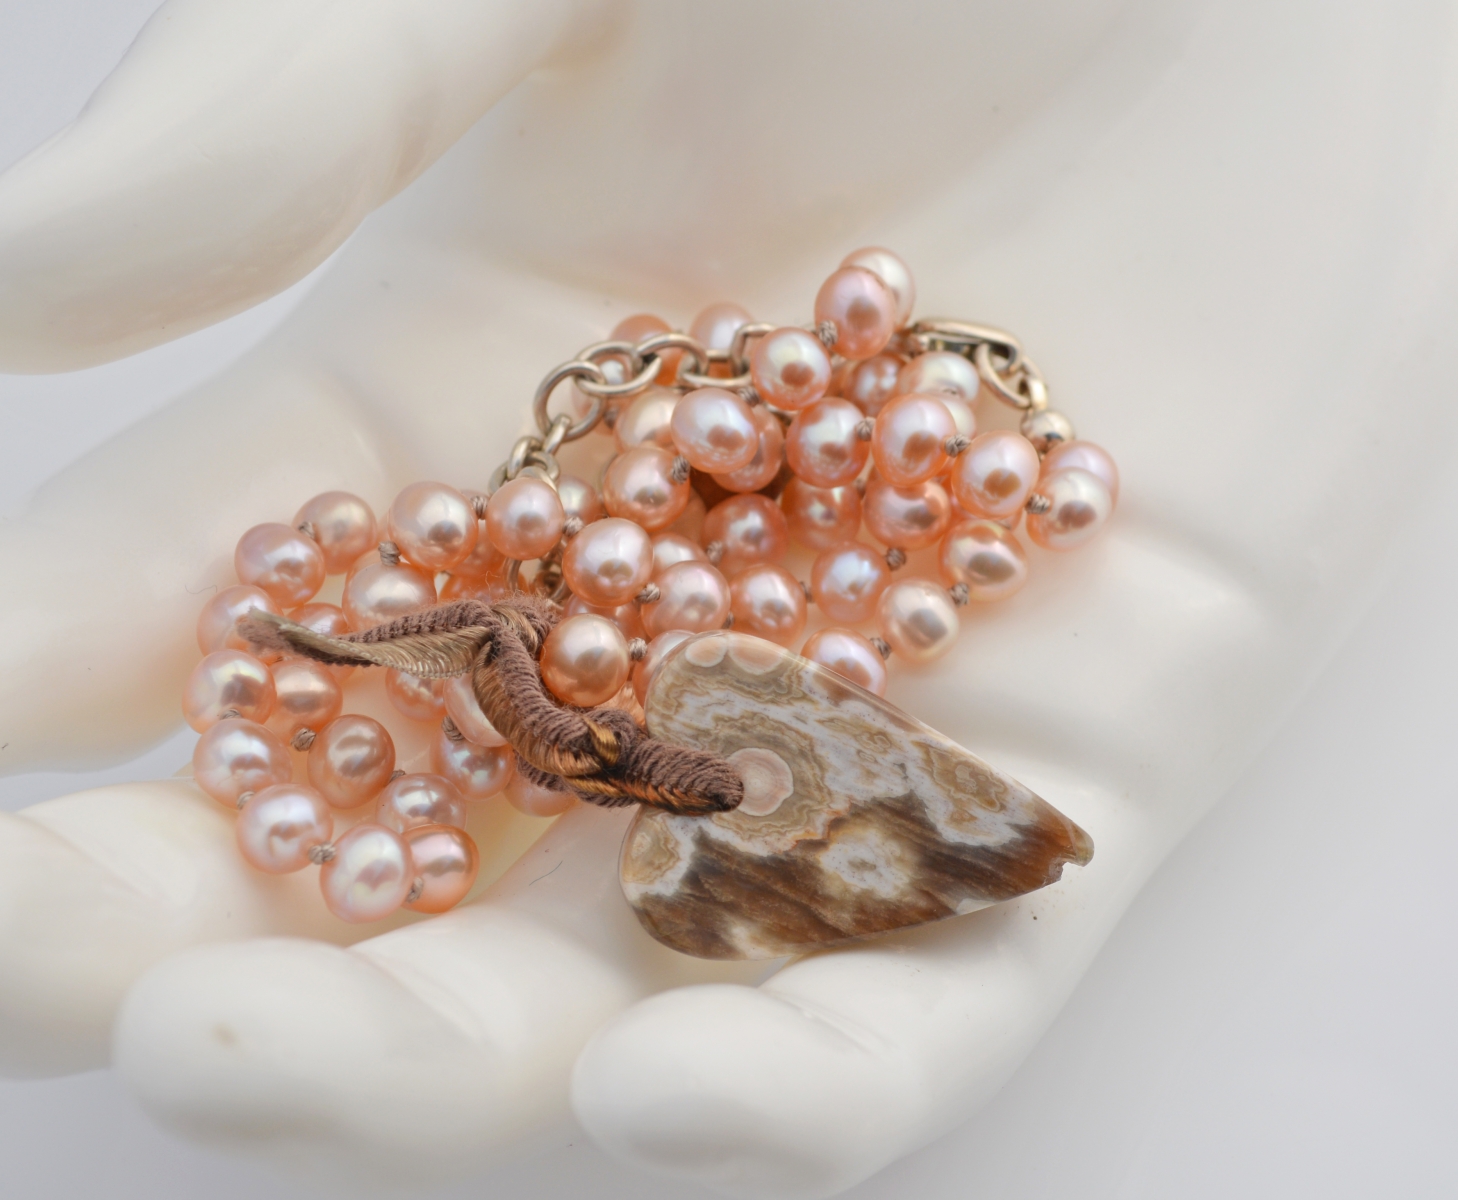 Pearl and Ocean Jasper heart necklace